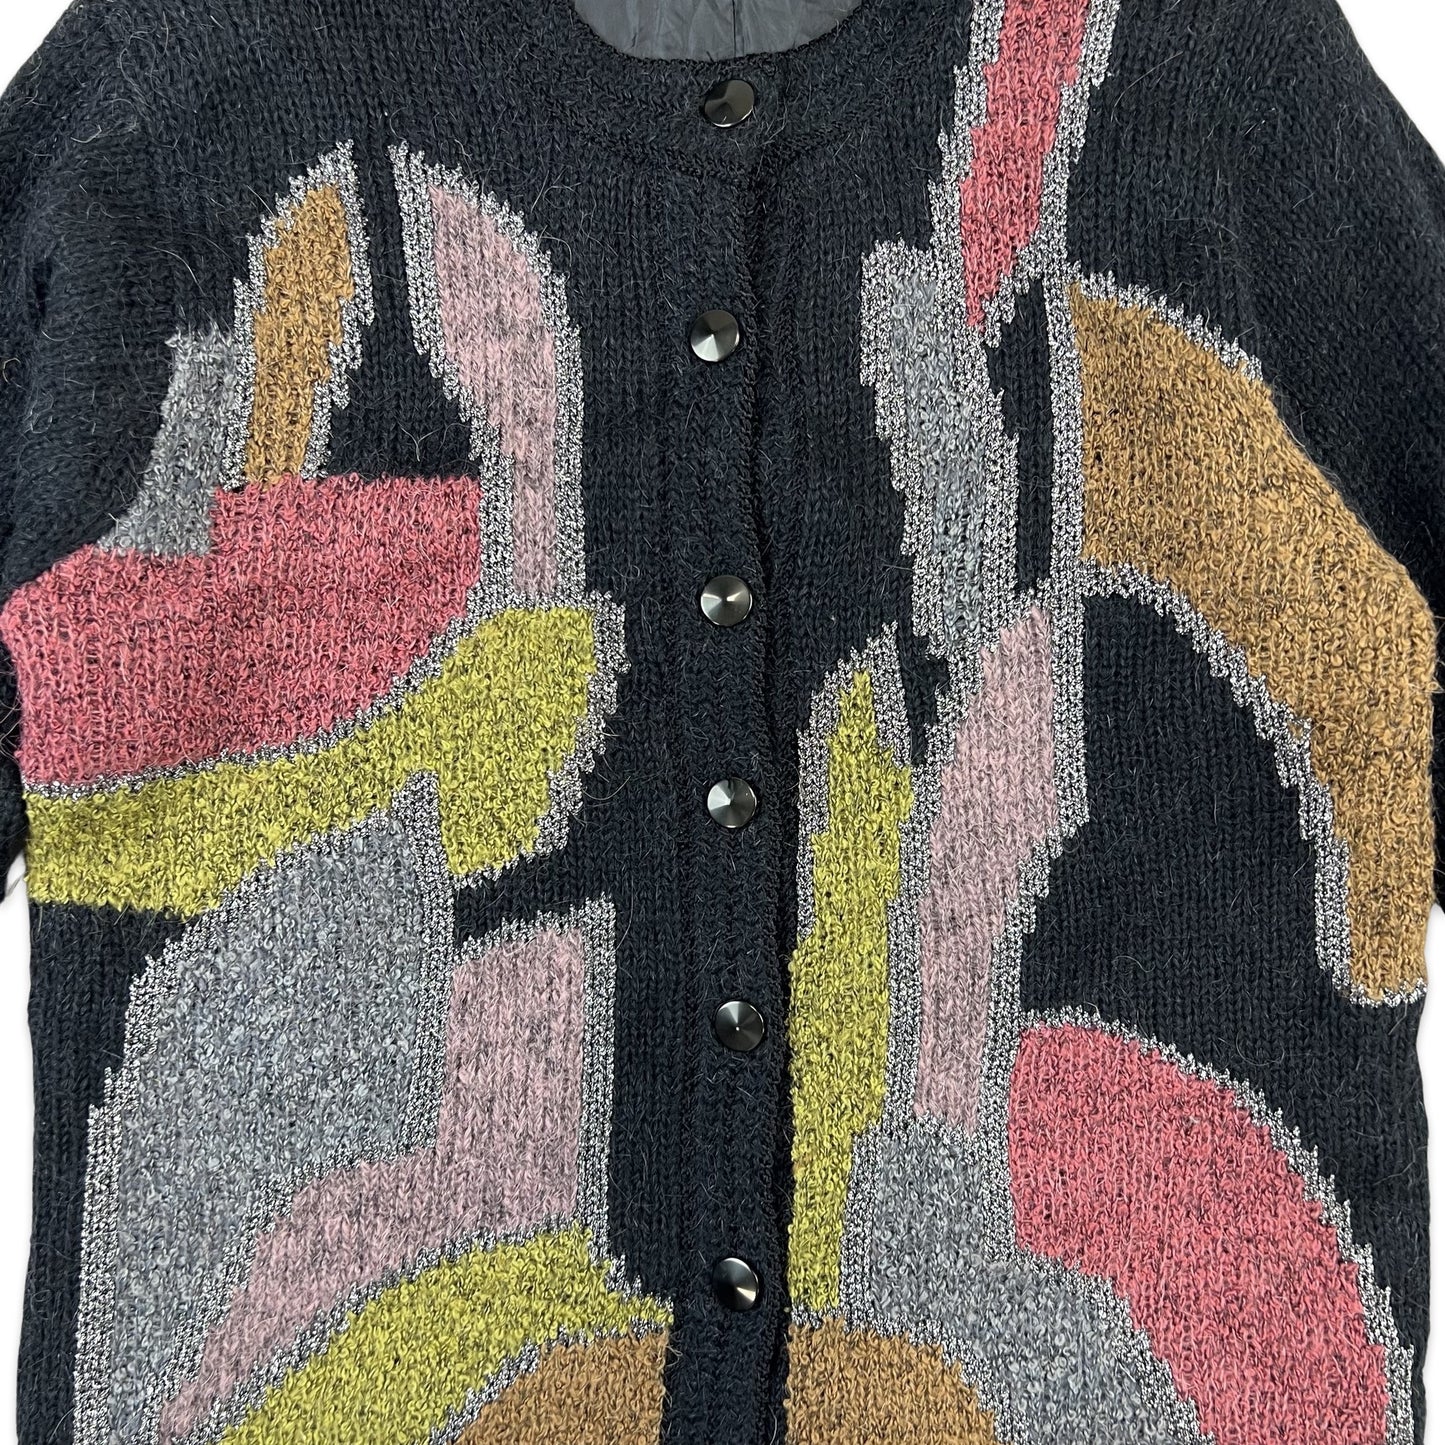 Vintage Abstract Print Cardigan Black Silver Pink Yellow 12 14 16